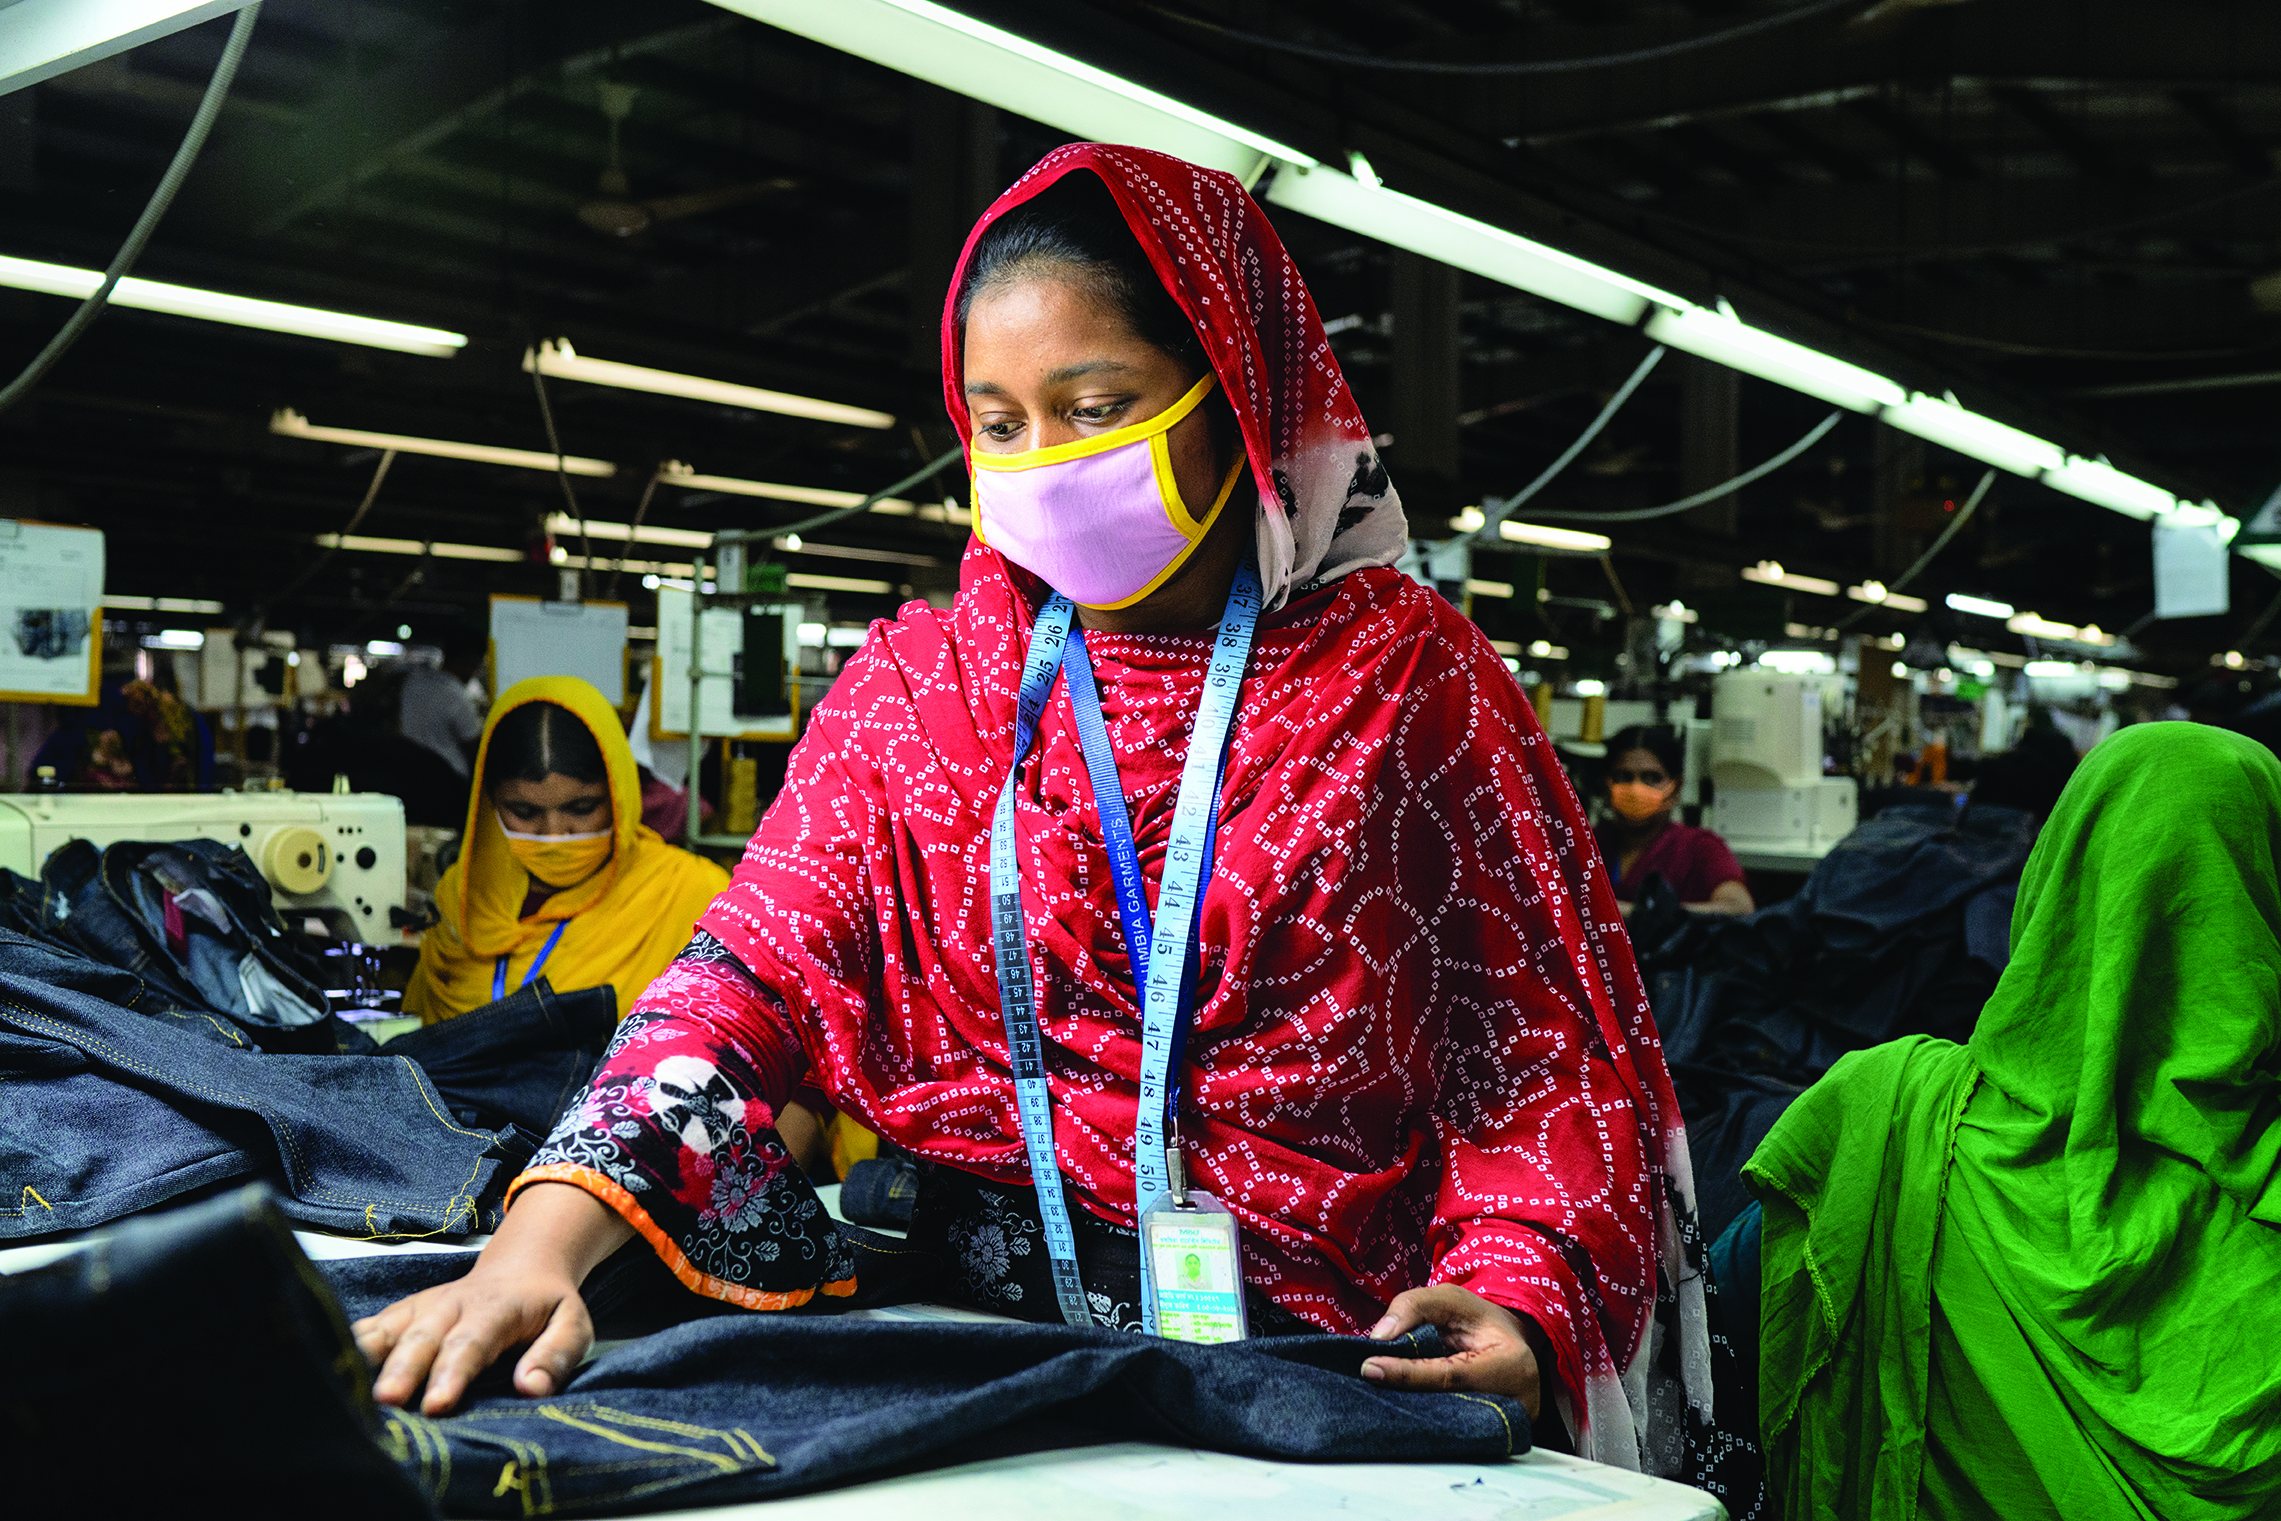 Mukta Khatun works as a operator in the quality section of the textile factory in Bangladesh. She is the vice president of Anti-Harassment Committee and is actively involved in problem solving and working to bring positive changes of factory management. Fabeha Monir/CARE